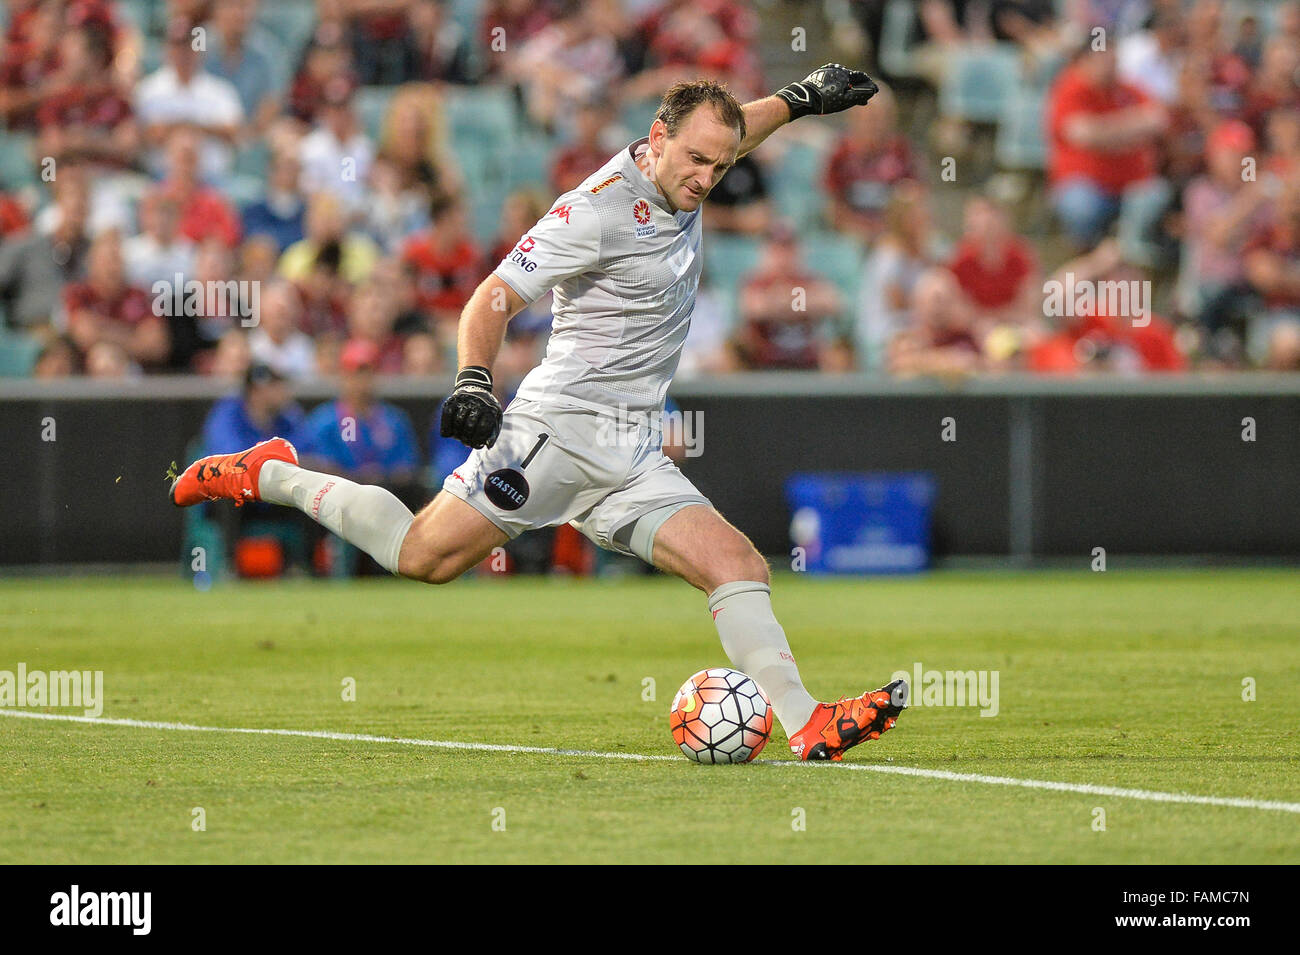 Pirtek Stadium, Sydney, Australia. 01st Jan, 2016. Hyundai A-League. Western Sydney versus Adelaide United. Adelaide captain and goalkeeper Eugene Galekovic. The game ended in a highly contested 0-0 draw. © Action Plus Sports/Alamy Live News Stock Photo